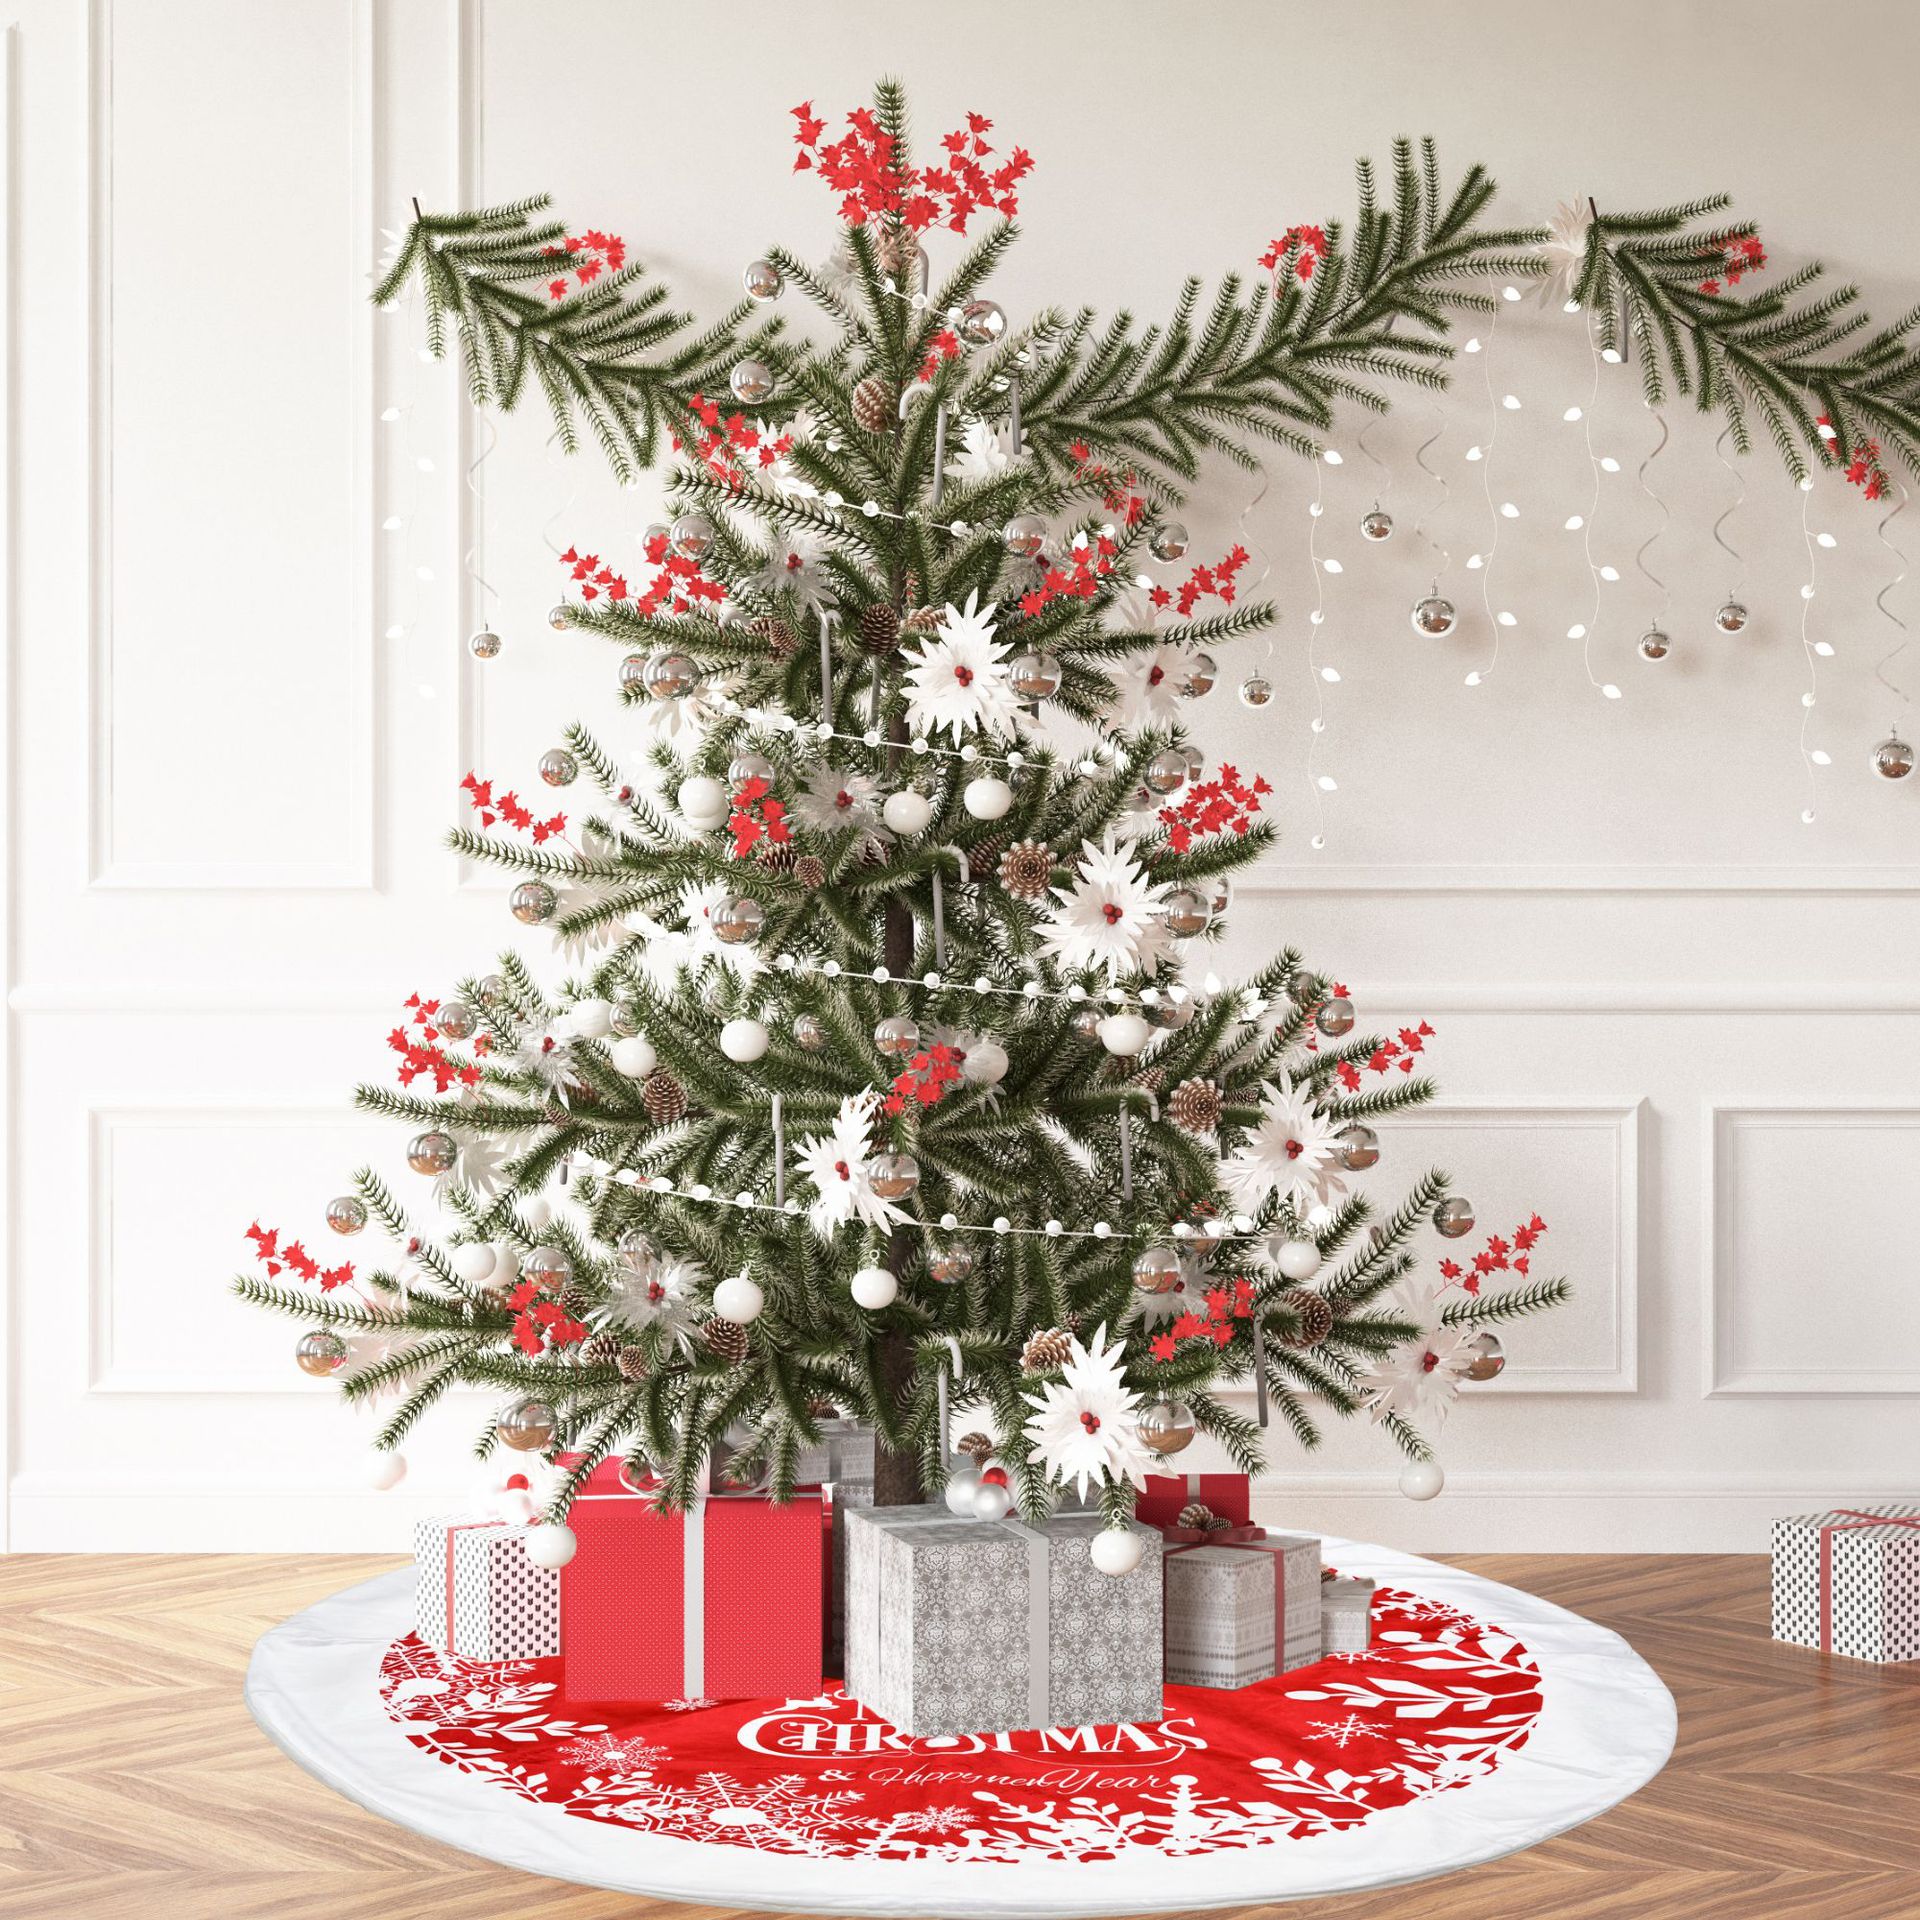 Christmas Family Holiday Party Decorations Tree Skirt,Diameter 90cm